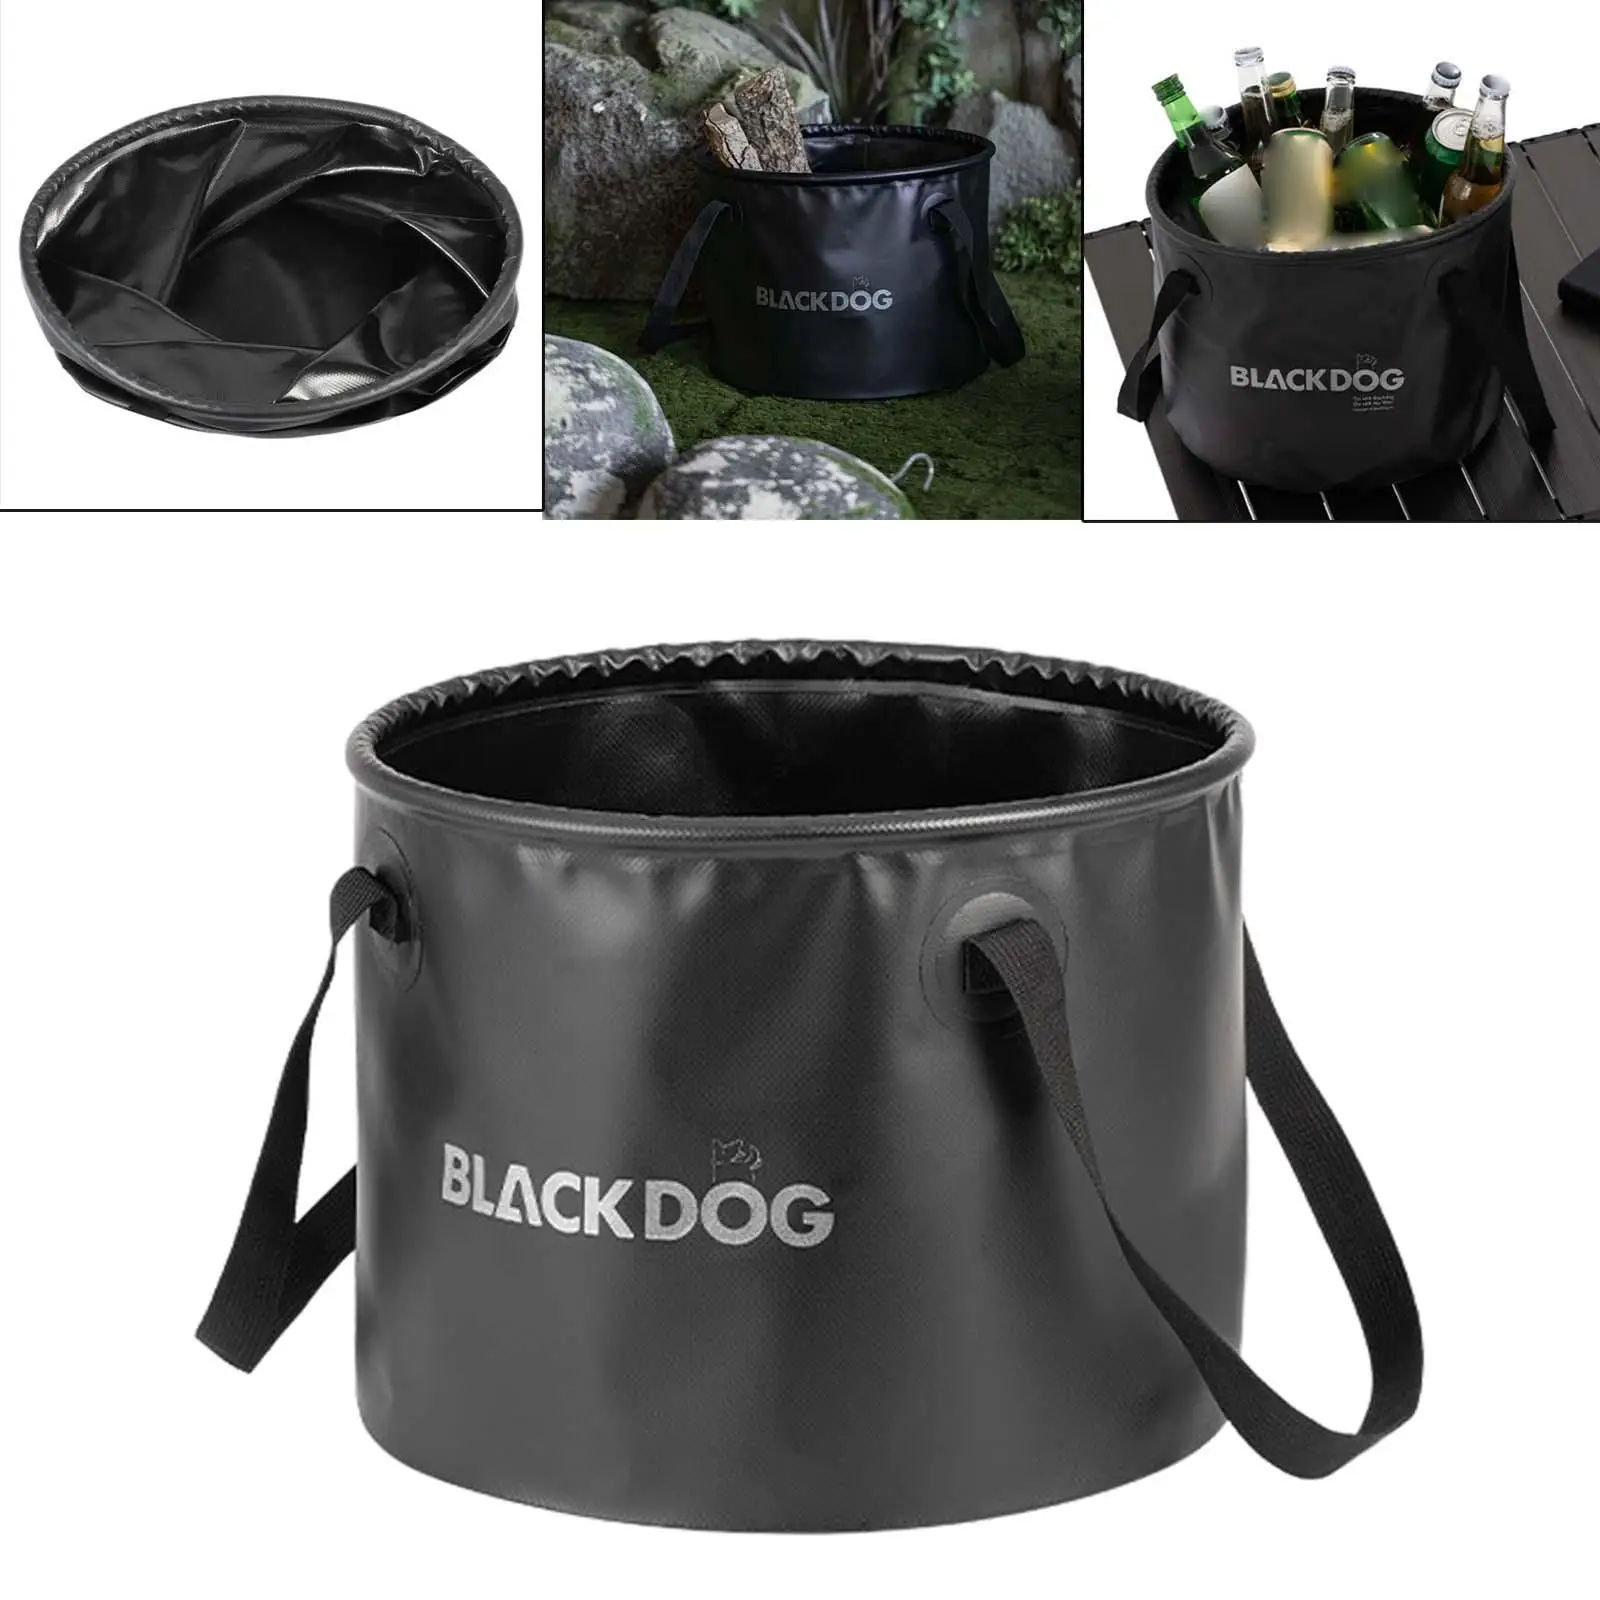 Foldable Round Bucket with Handle Portable 20L Mesh Container for Traveling